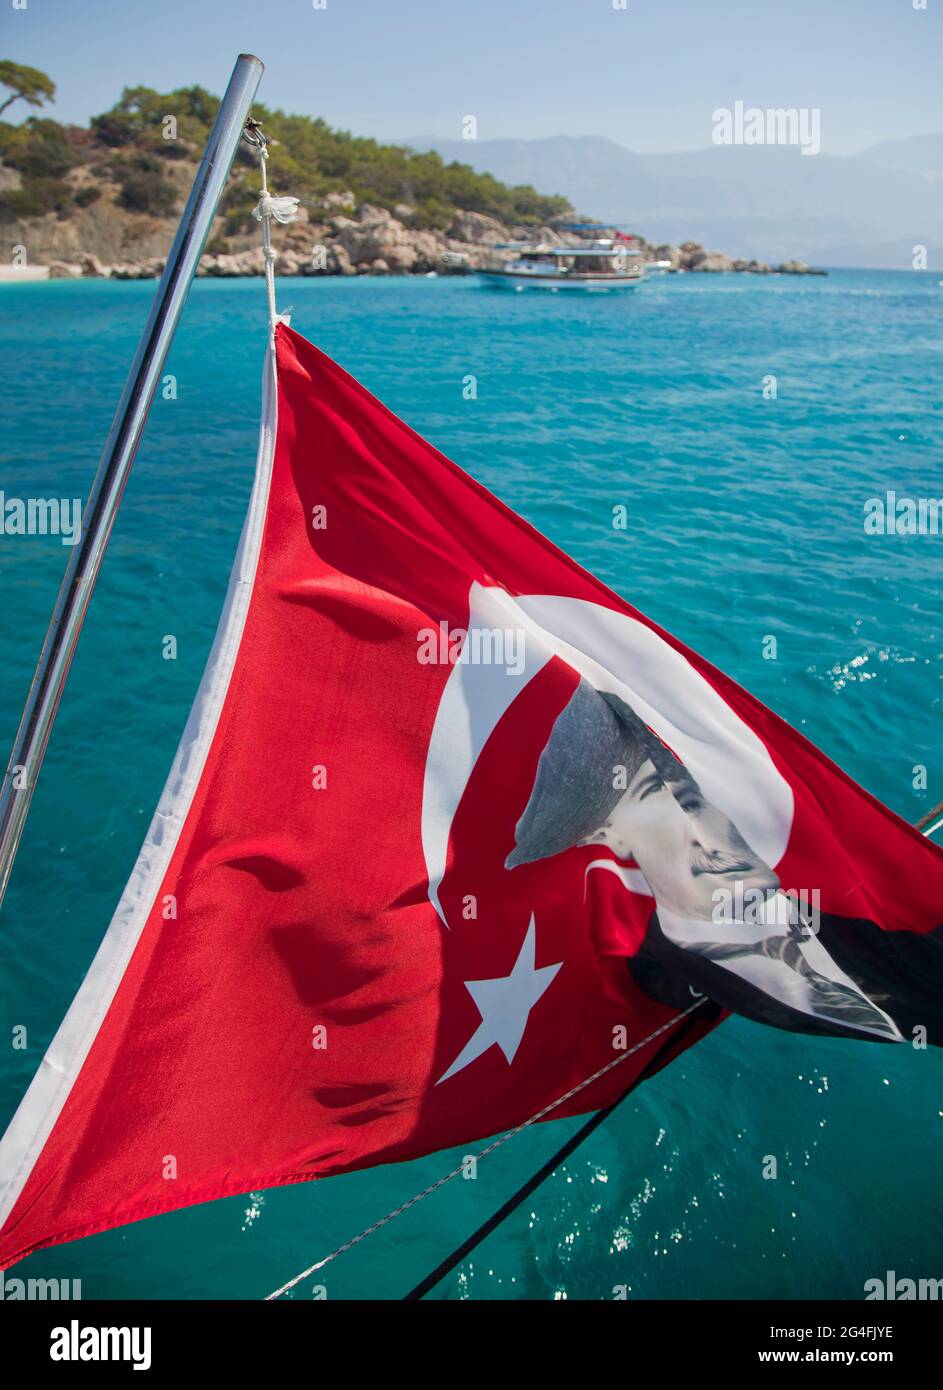 A Turkish flag with the image of Mustafa Kemal Atatürk flies from the rear of a Gullet boat anchored in a bay near to Kalkan in Turkey.  Kalkan is a p Stock Photo